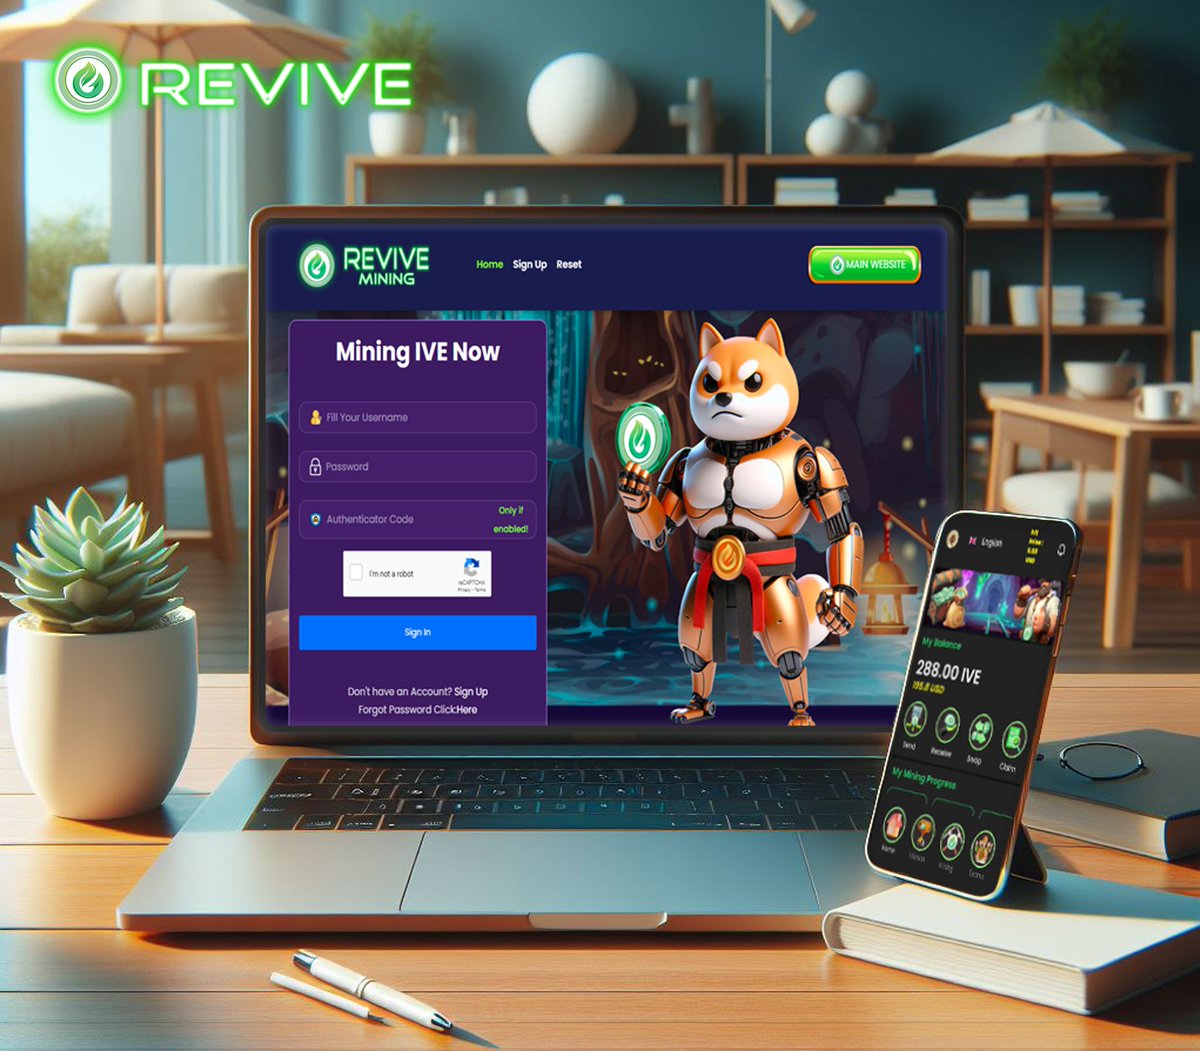 🚀 Exciting news, IVEFams! Our 𝗪𝗵𝗶𝘁𝗲𝗽𝗮𝗽𝗲𝗿 is dropping in a few hours with new updates! Keep believing in Revive 💚💚 🎯 Mining allocation is under 73 million IVE, aiming for 100 million! Grow your IVE daily, mine now: 📳 revive.global/signin 📱 𝗔𝗻𝗱𝗿𝗼𝗶𝗱